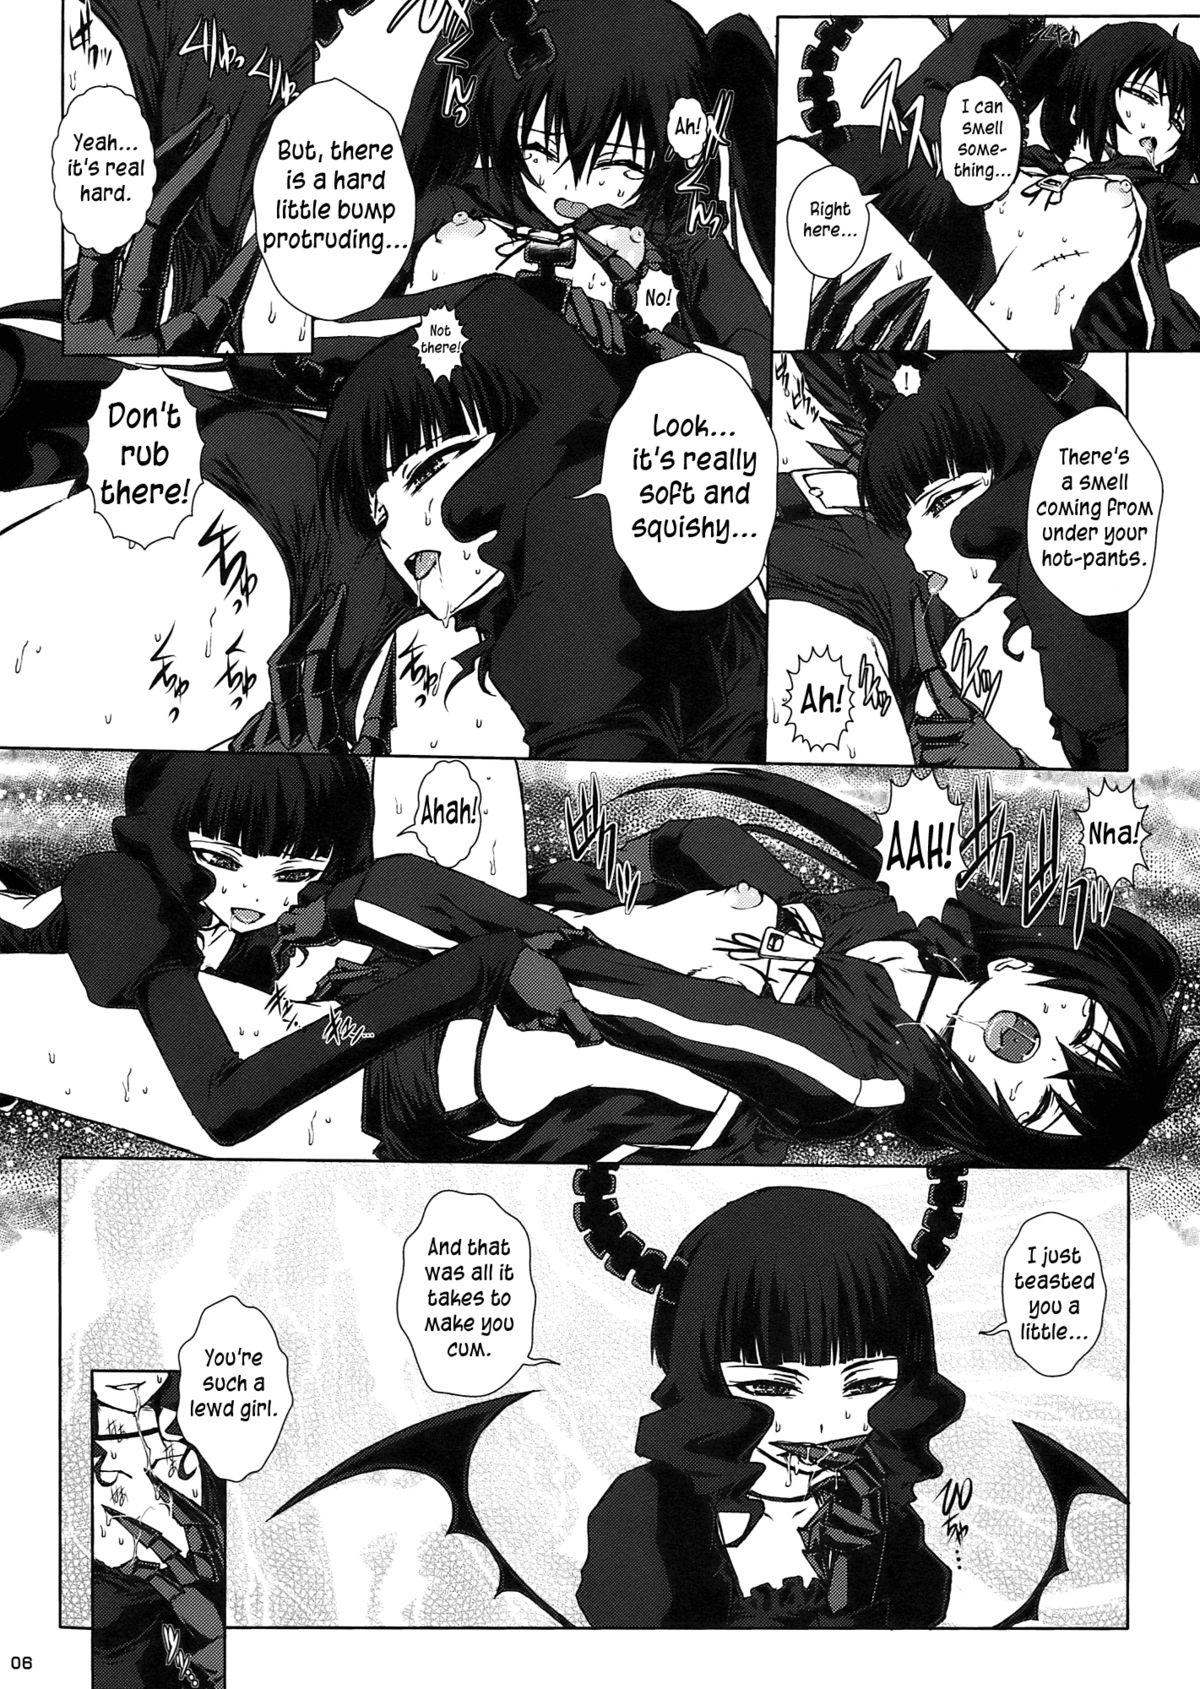 Mulher B★RS SAND! - Black rock shooter Yanks Featured - Page 8